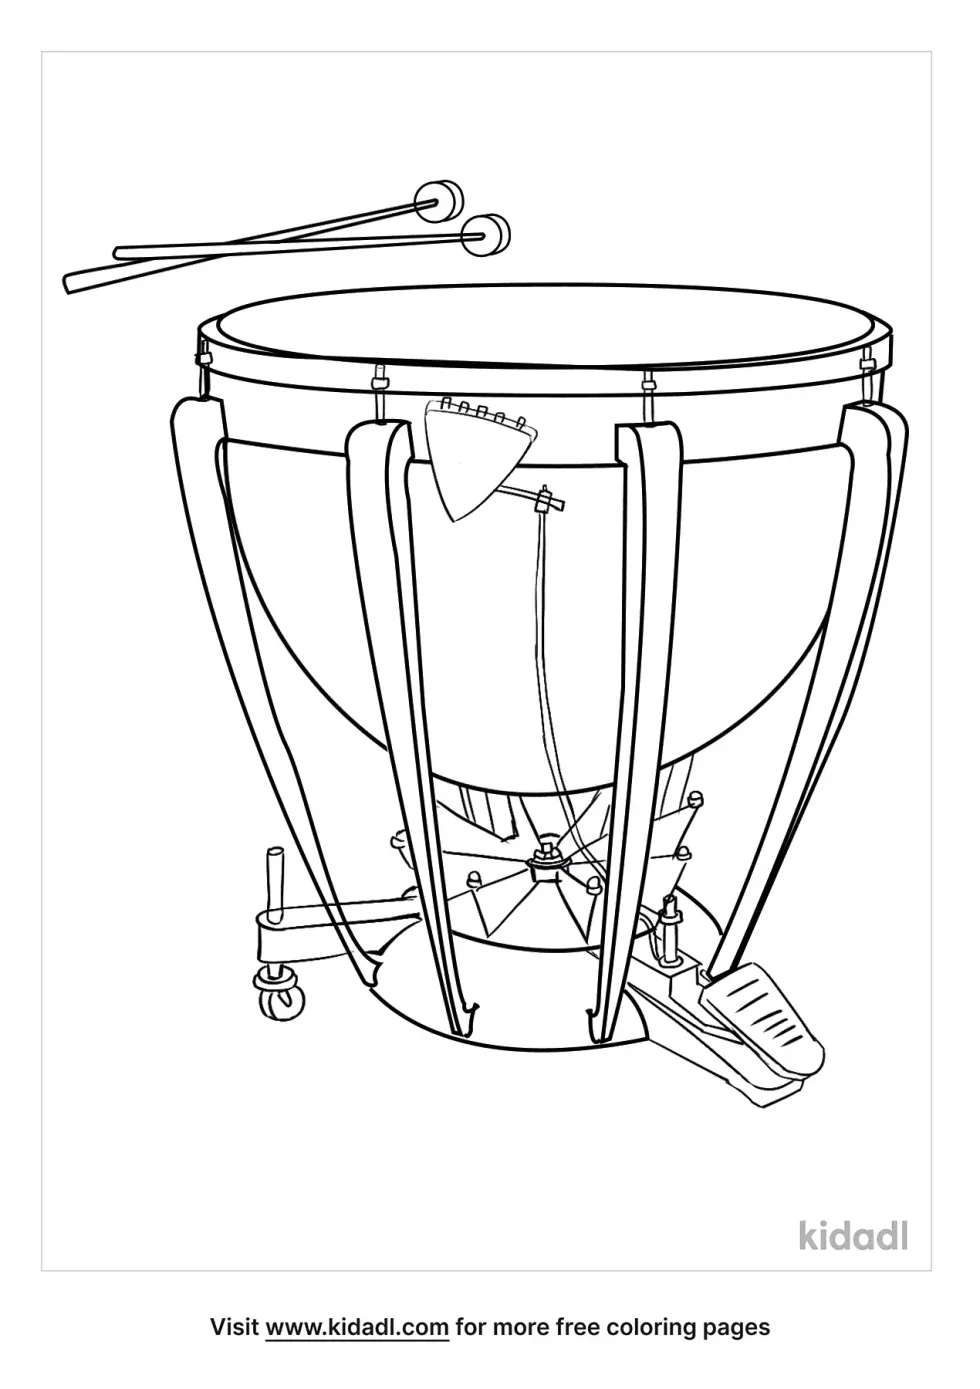 Kettledrum Coloring Page